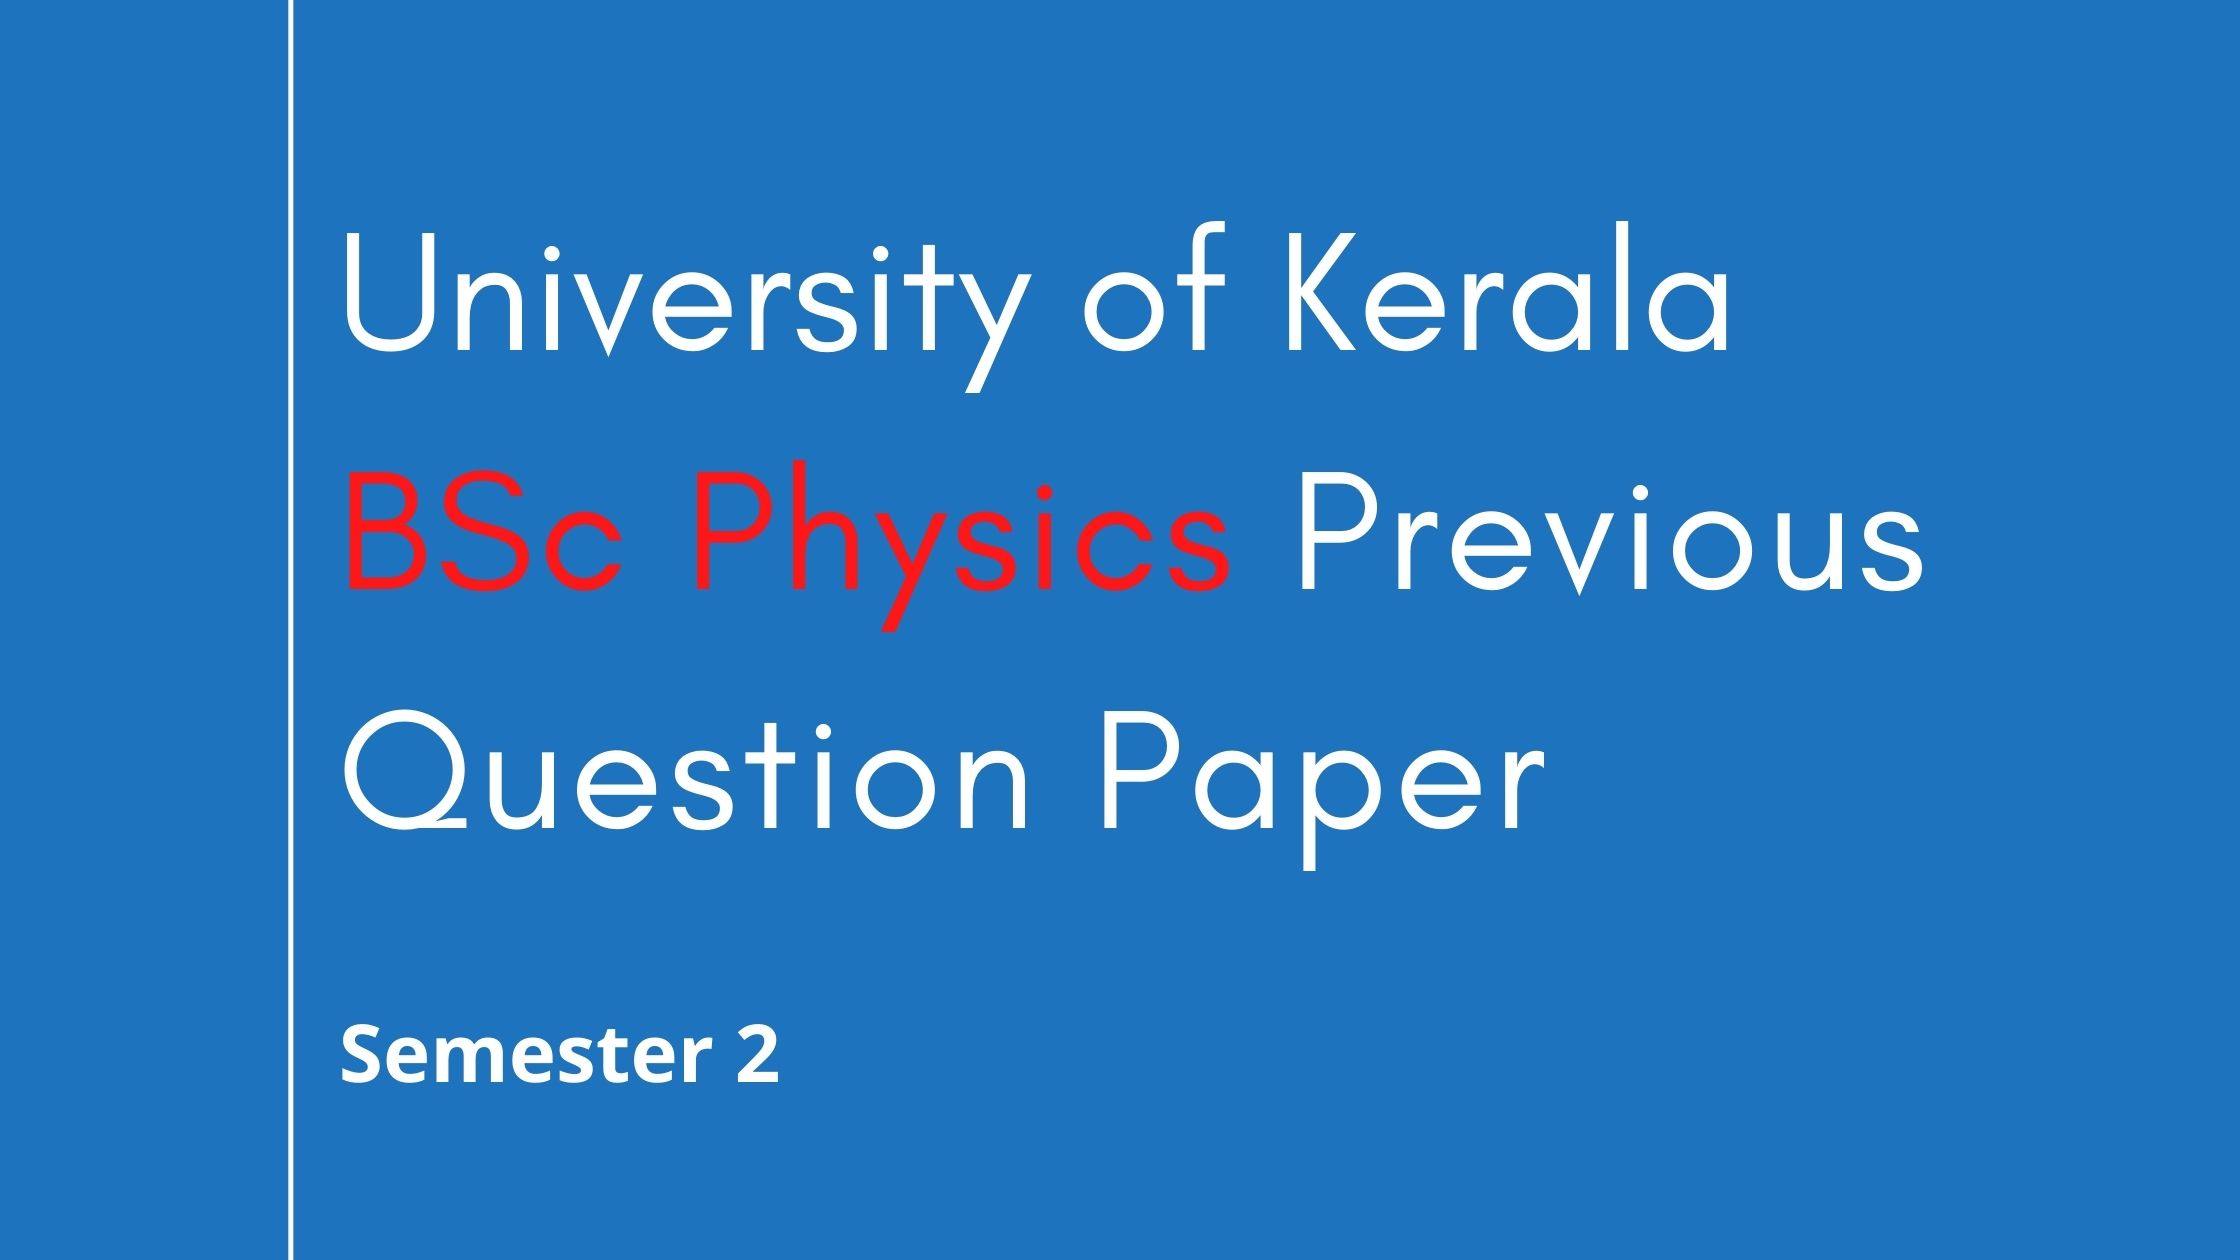 BSc Physics Second Semester Previous Year Question Papers of Kerala University